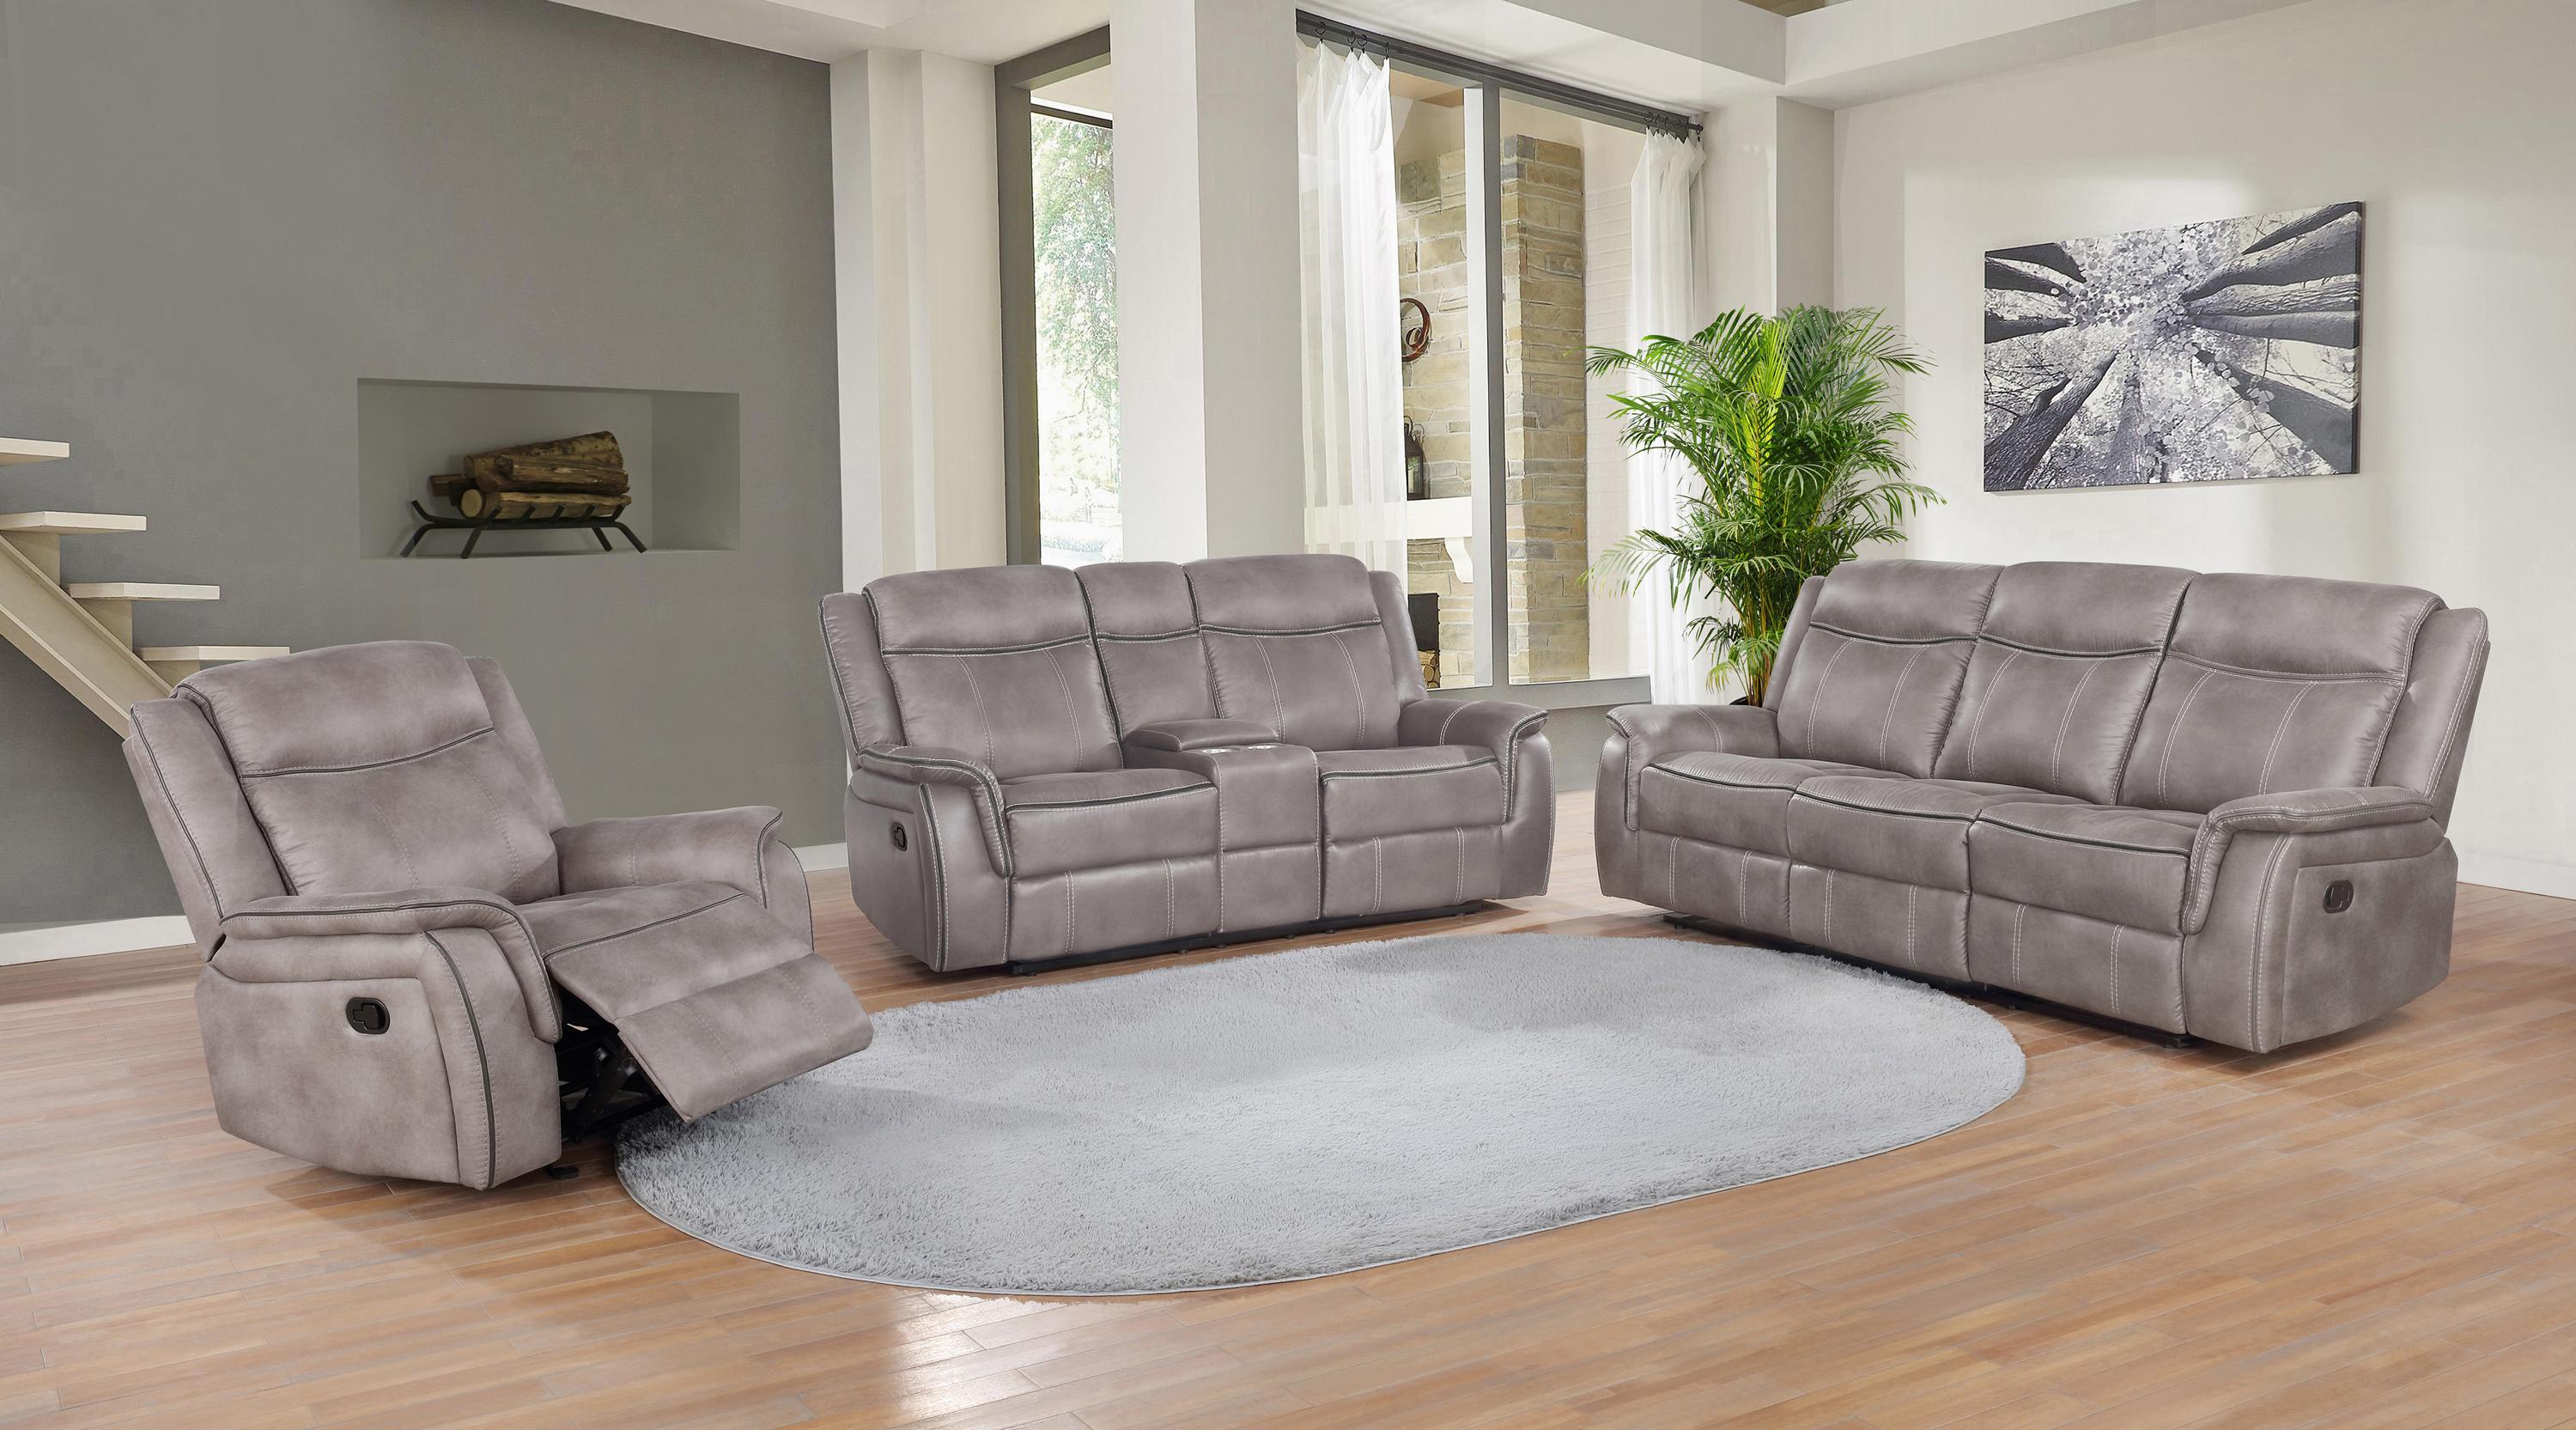 Transitional Living Room Set 603501-S2 Lawrence 603501-S2 in Taupe 